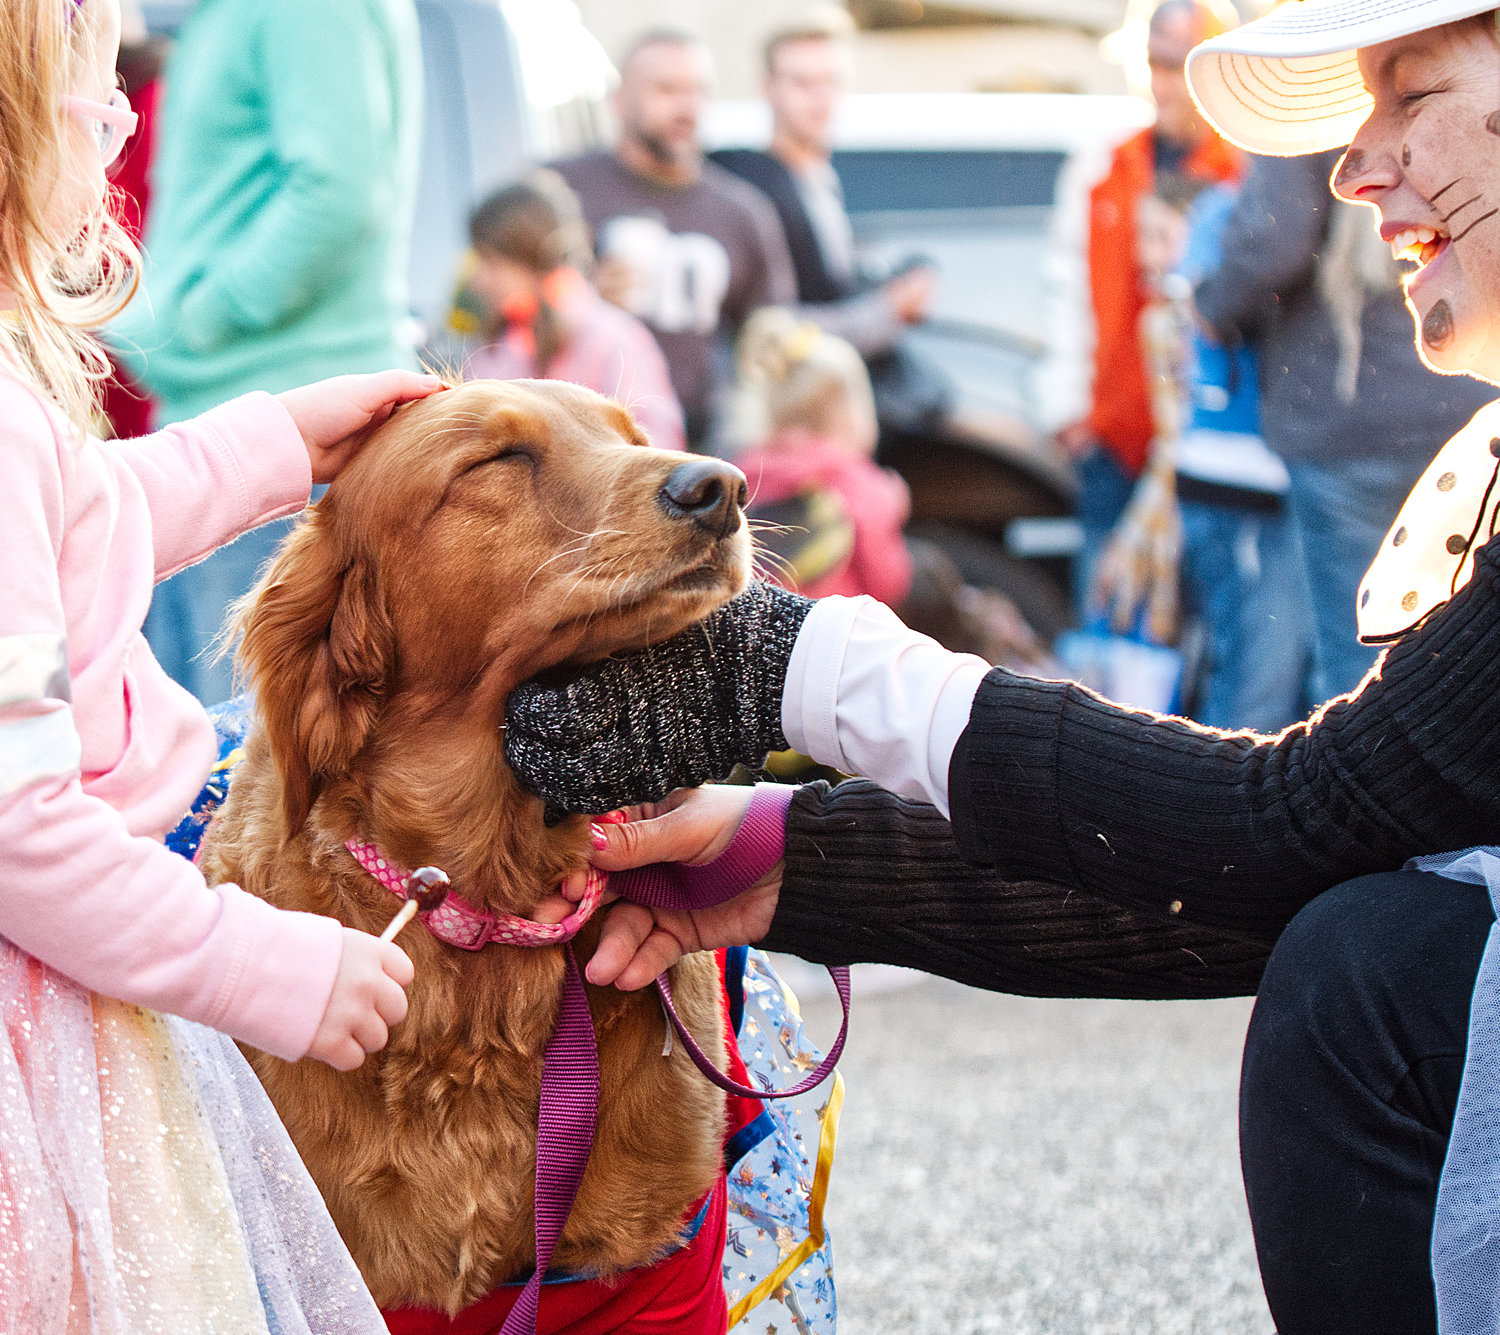 Jamie Johnson (r) and dog Maxi at trunk or treat in downtown Mineola.